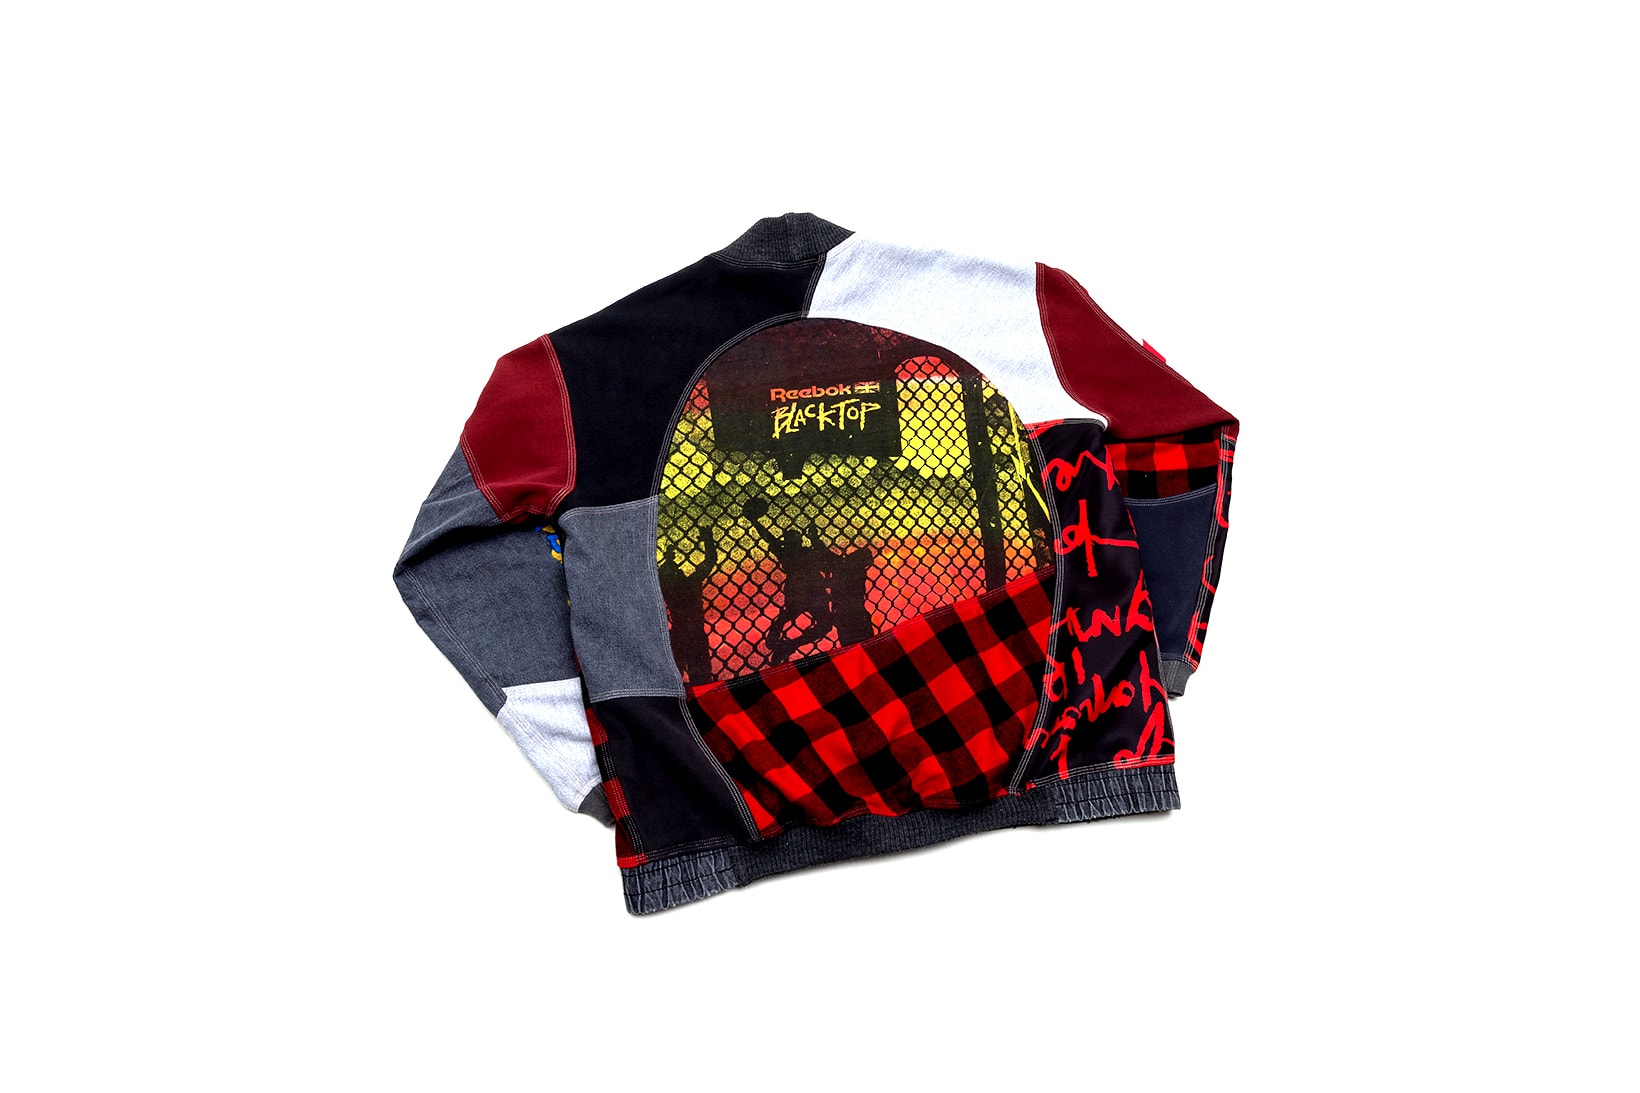 Reebok Justin Mensinger Pieces of Us Mental Health Upcycle Collaboration Denim Plaid Back Release Info